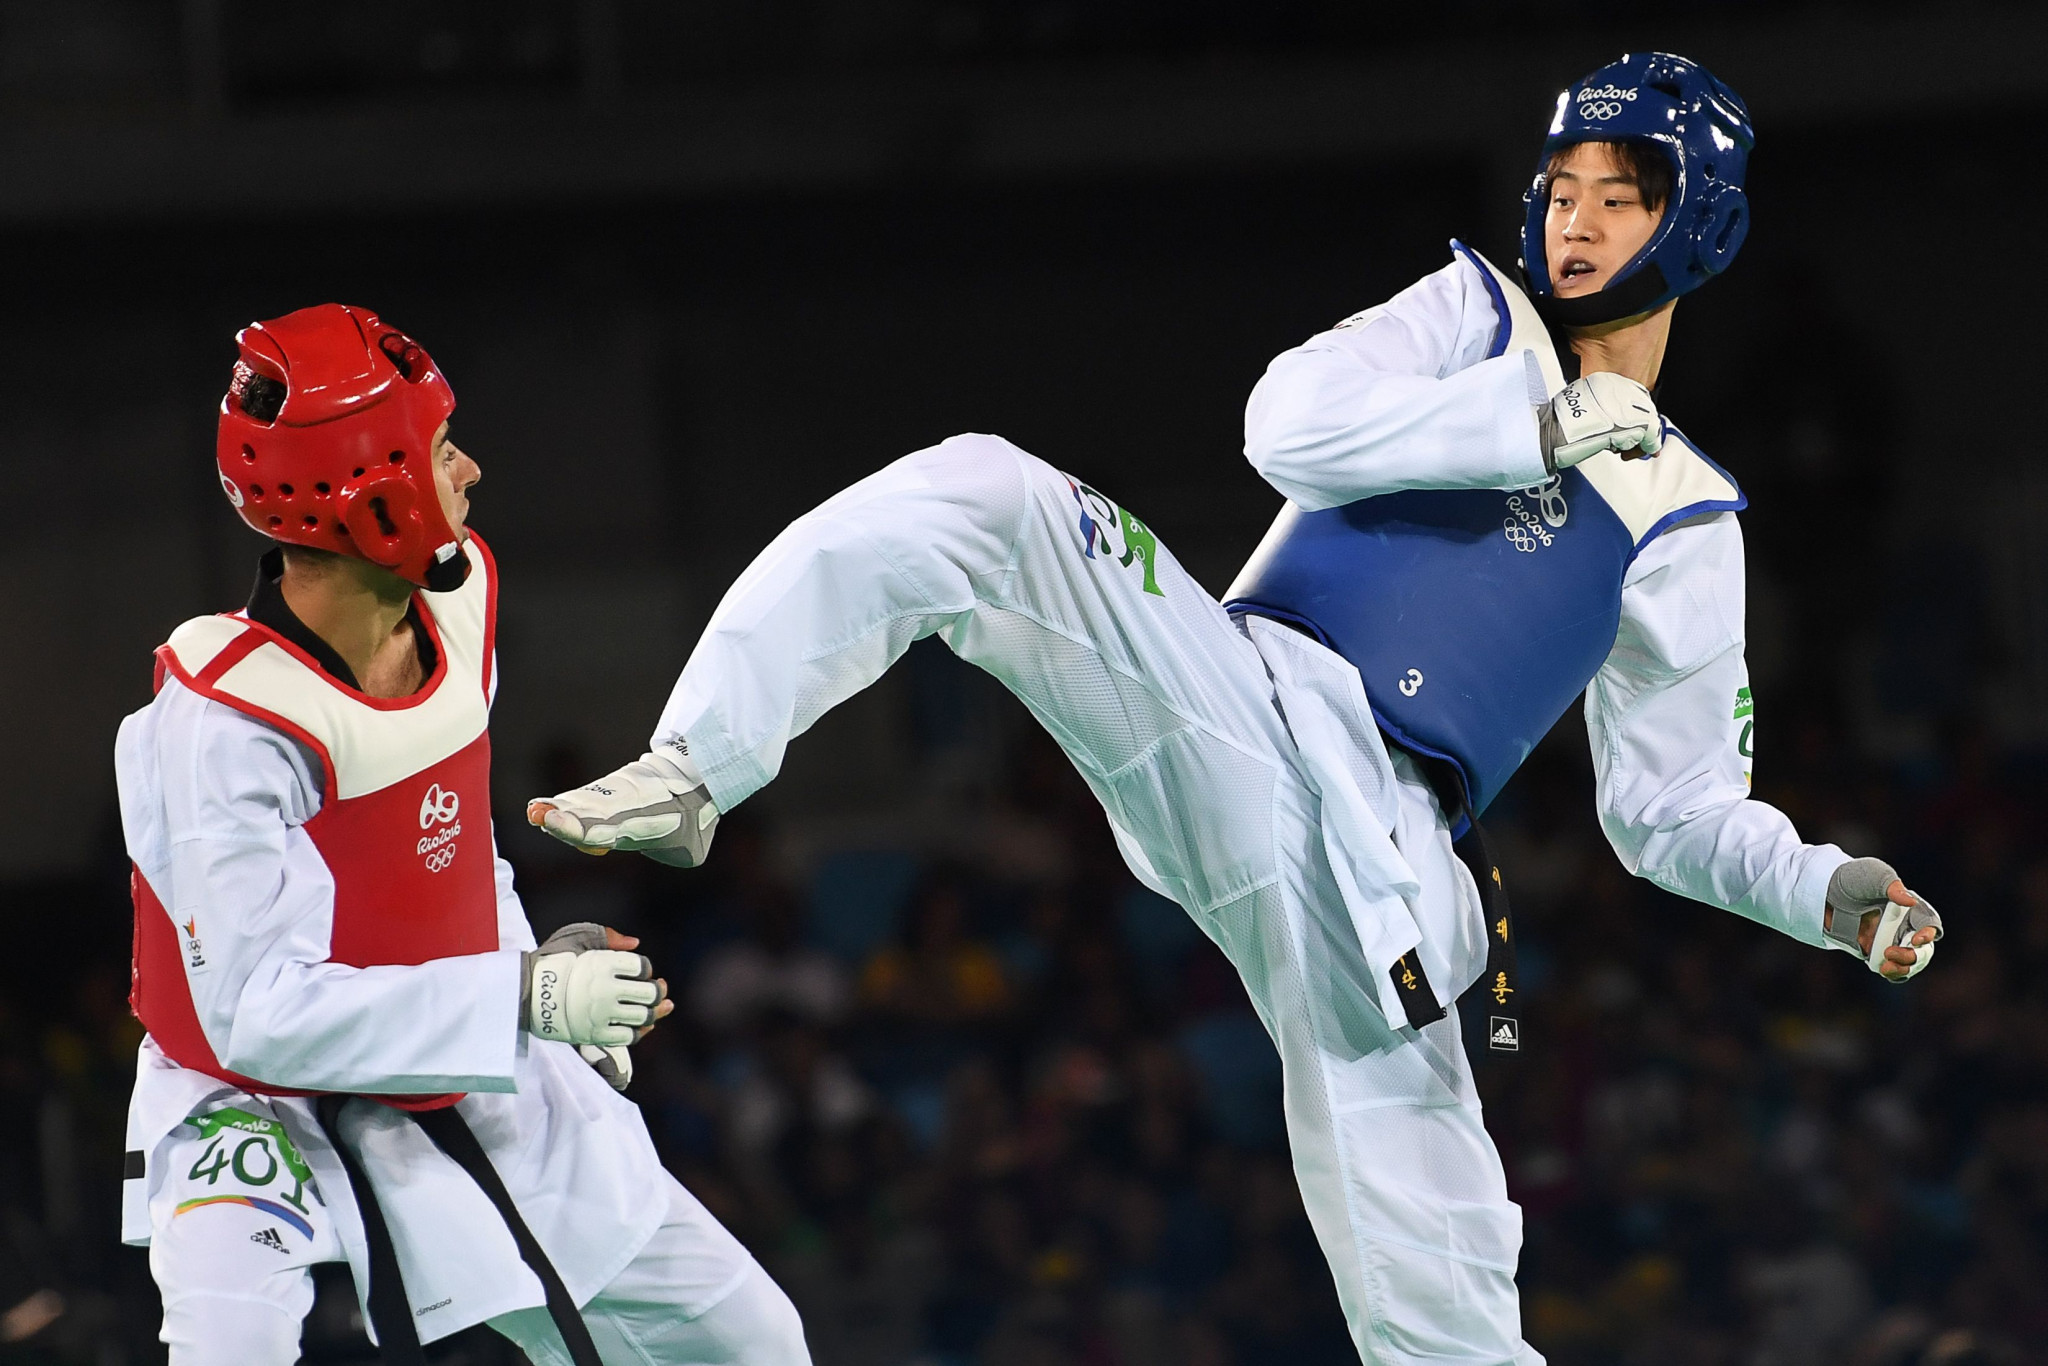 Three-time 63kg world champion Lee Dae-hoon will make his fifth appearance at a World Taekwondo Championships in Manchester ©Getty Images